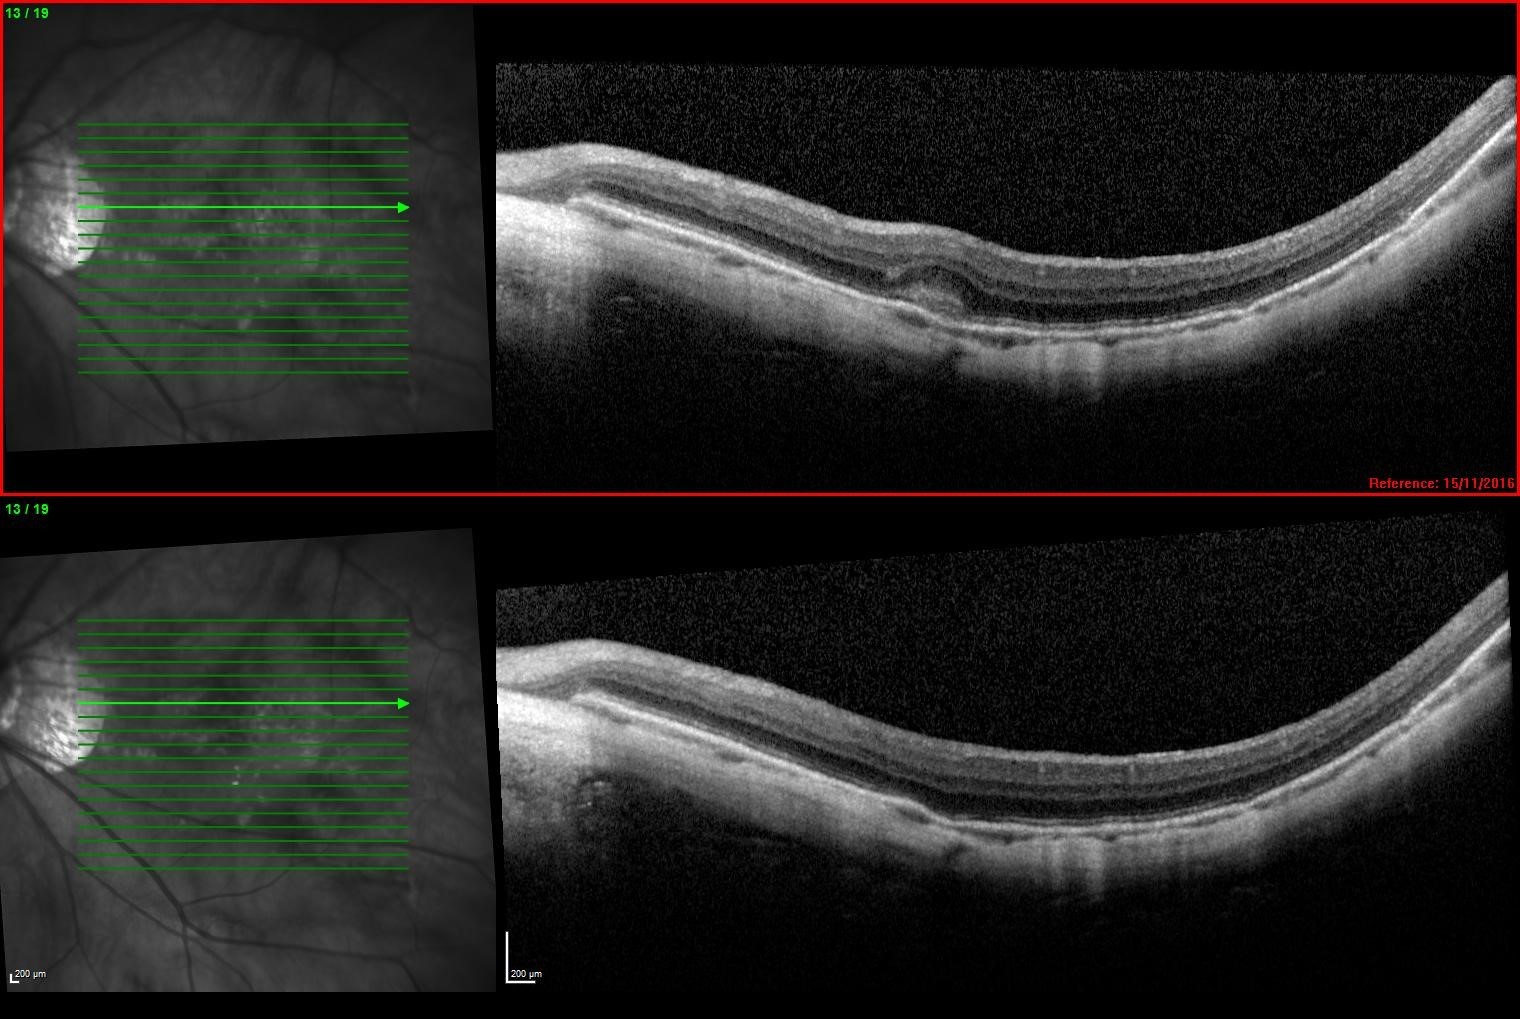 Figure 4: SD OCT with a newly diagnosed myopic CNV (above) and the same CNV 1 month following a singel intravitreal Bevacizumab injection (below)